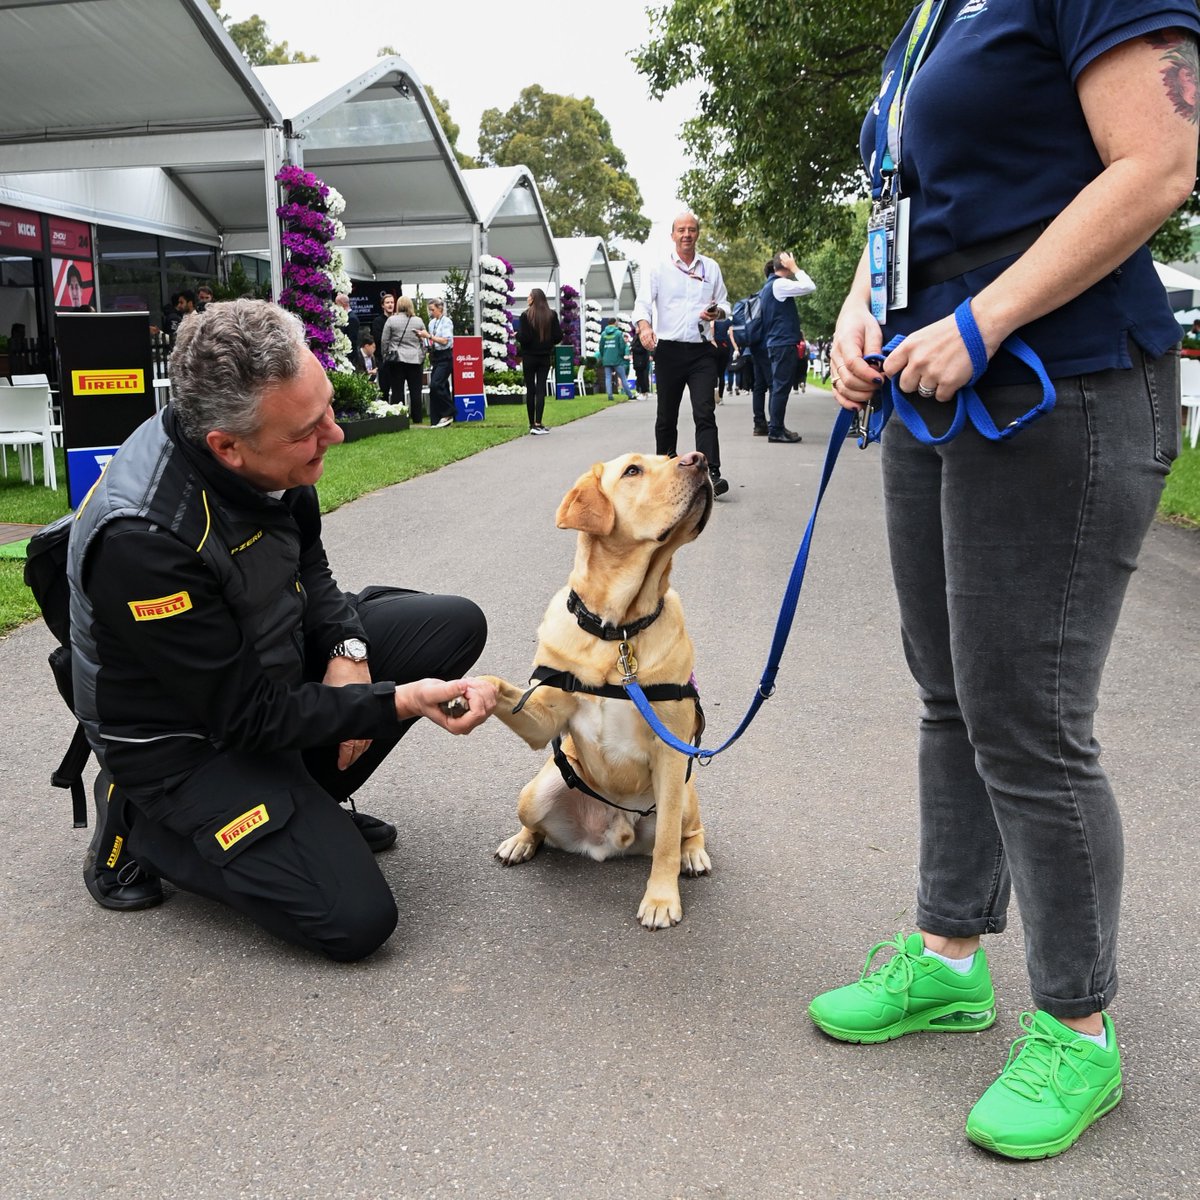 Is your heart rate rocketing from this intense ending to the #AusGP? 🥵 Here's @Mario_Isola and a cute doggo from @AssistanceDogs to help you unwind 😌